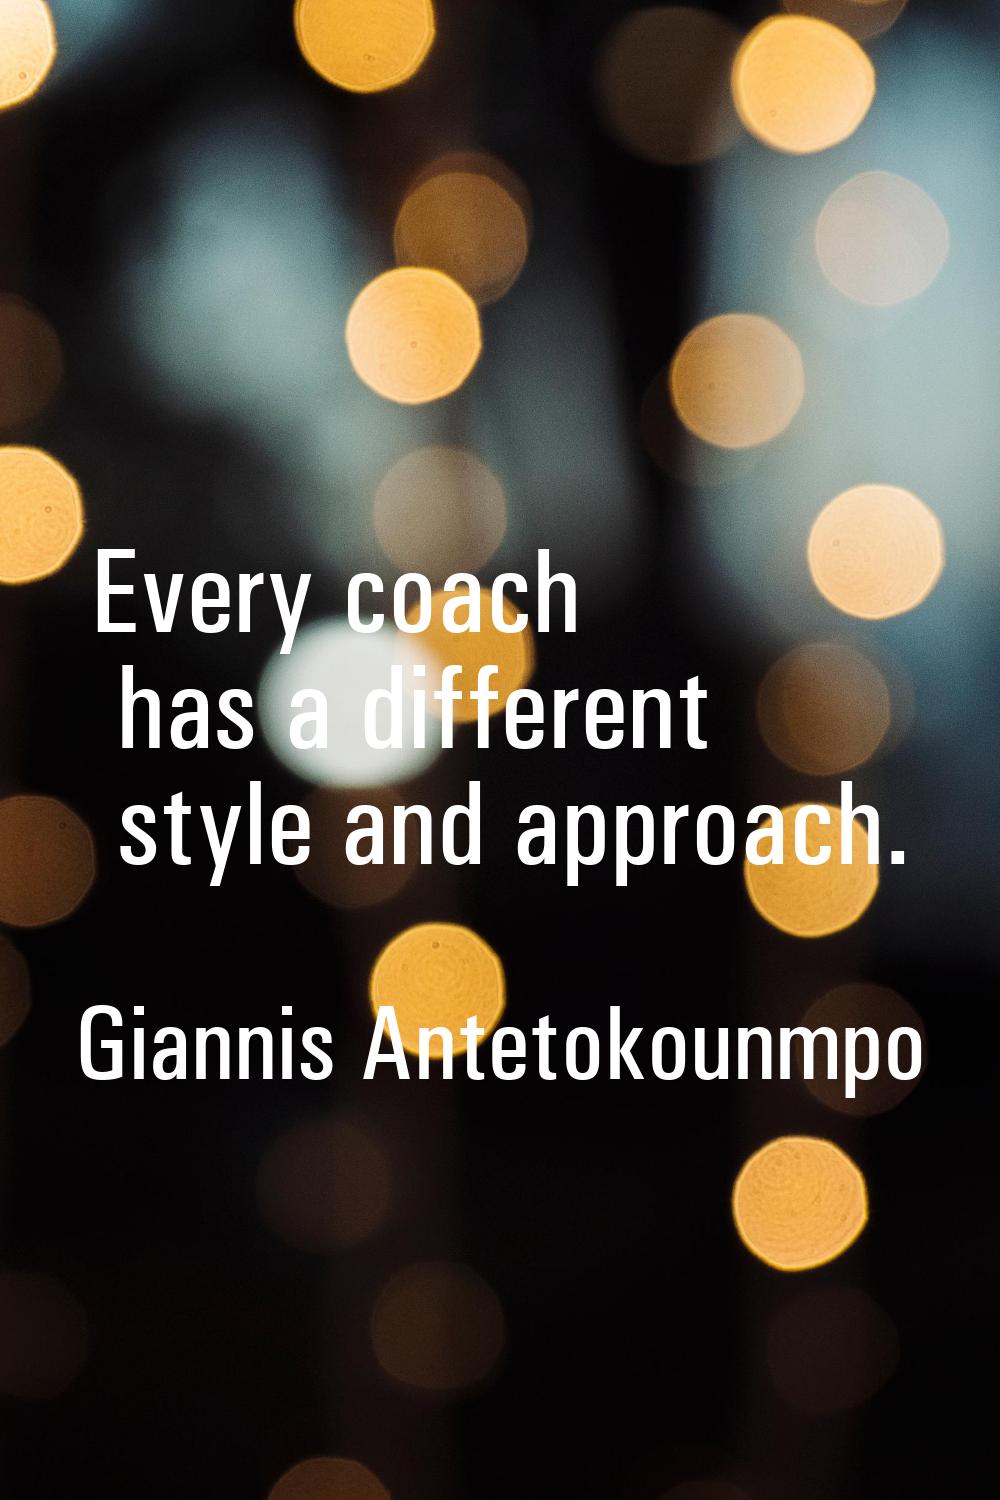 Every coach has a different style and approach.